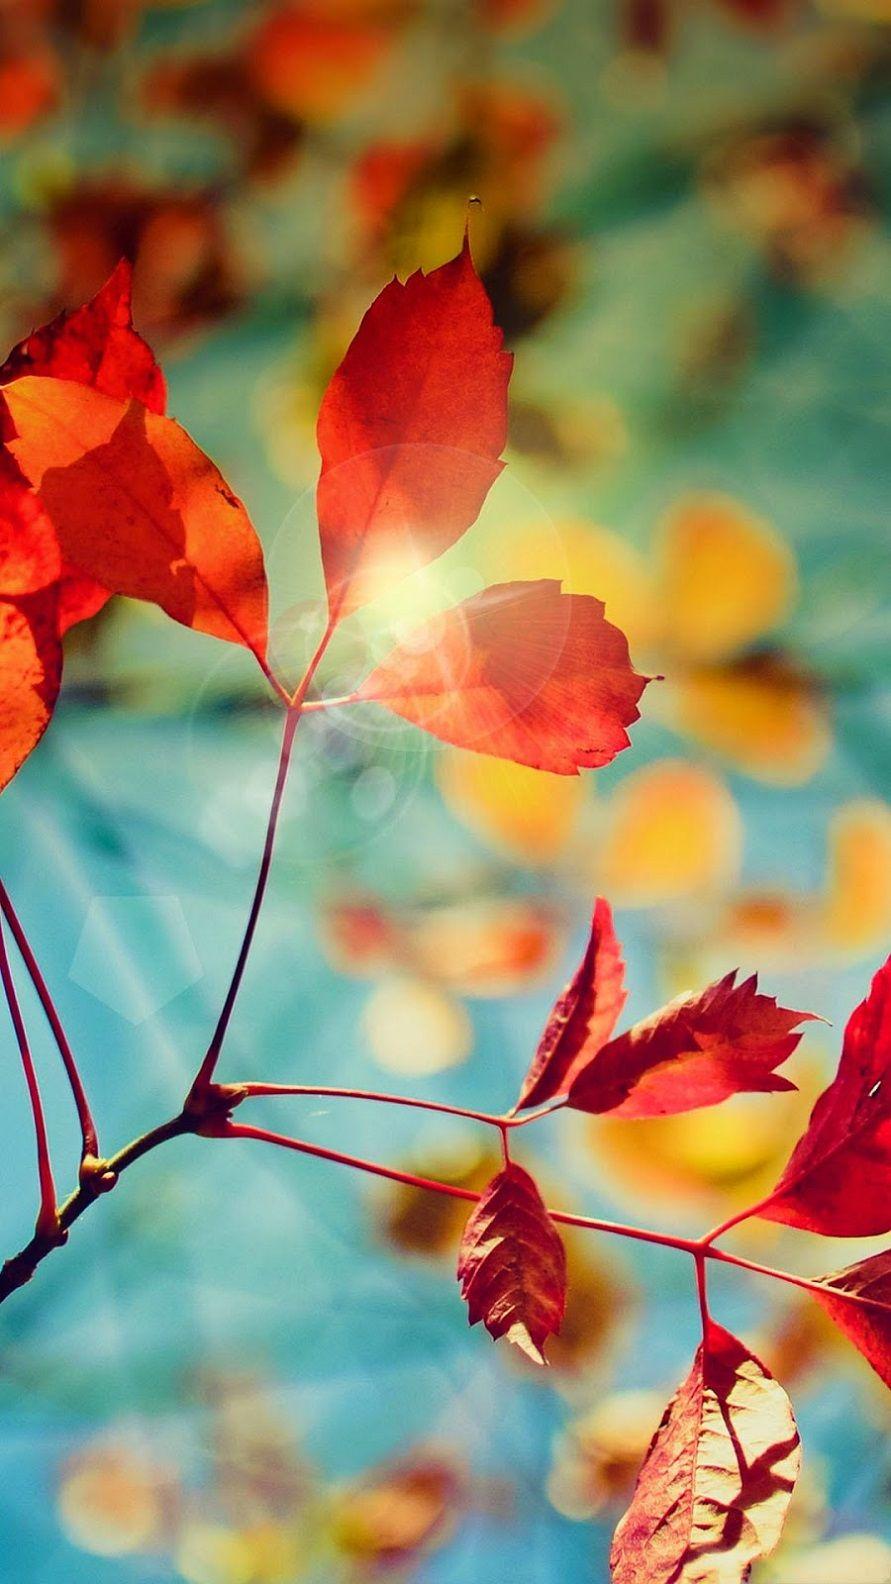 Autumn Leaves HD Wallpaper Android Phone